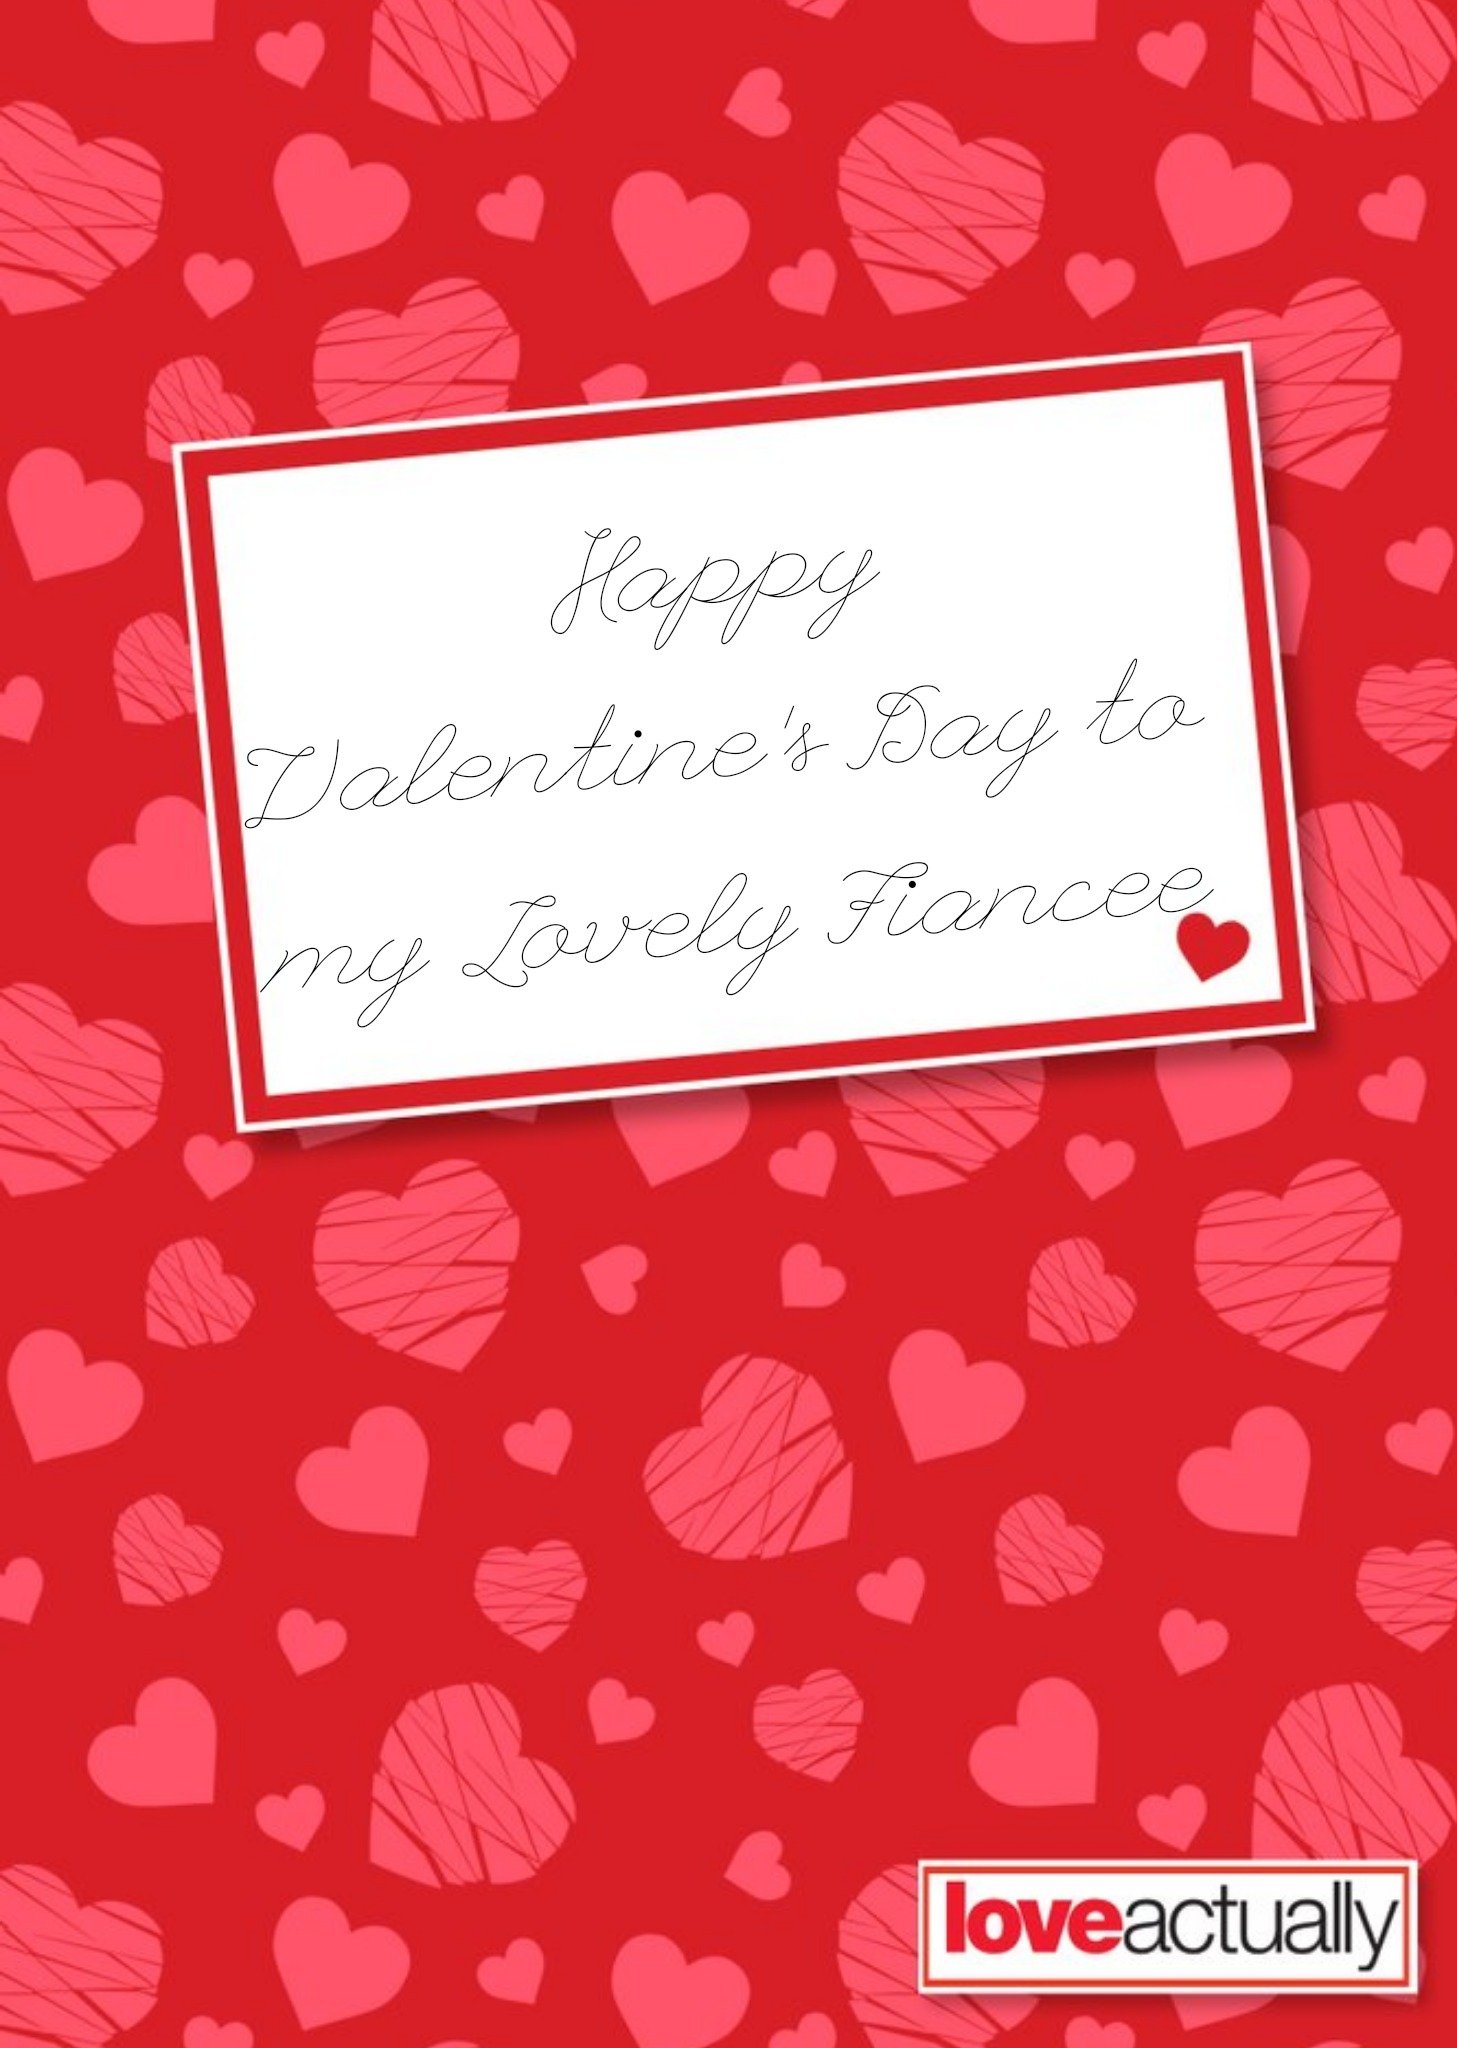 Other Love Actually To My Lovely Fiancee Valentine's Day Card Ecard